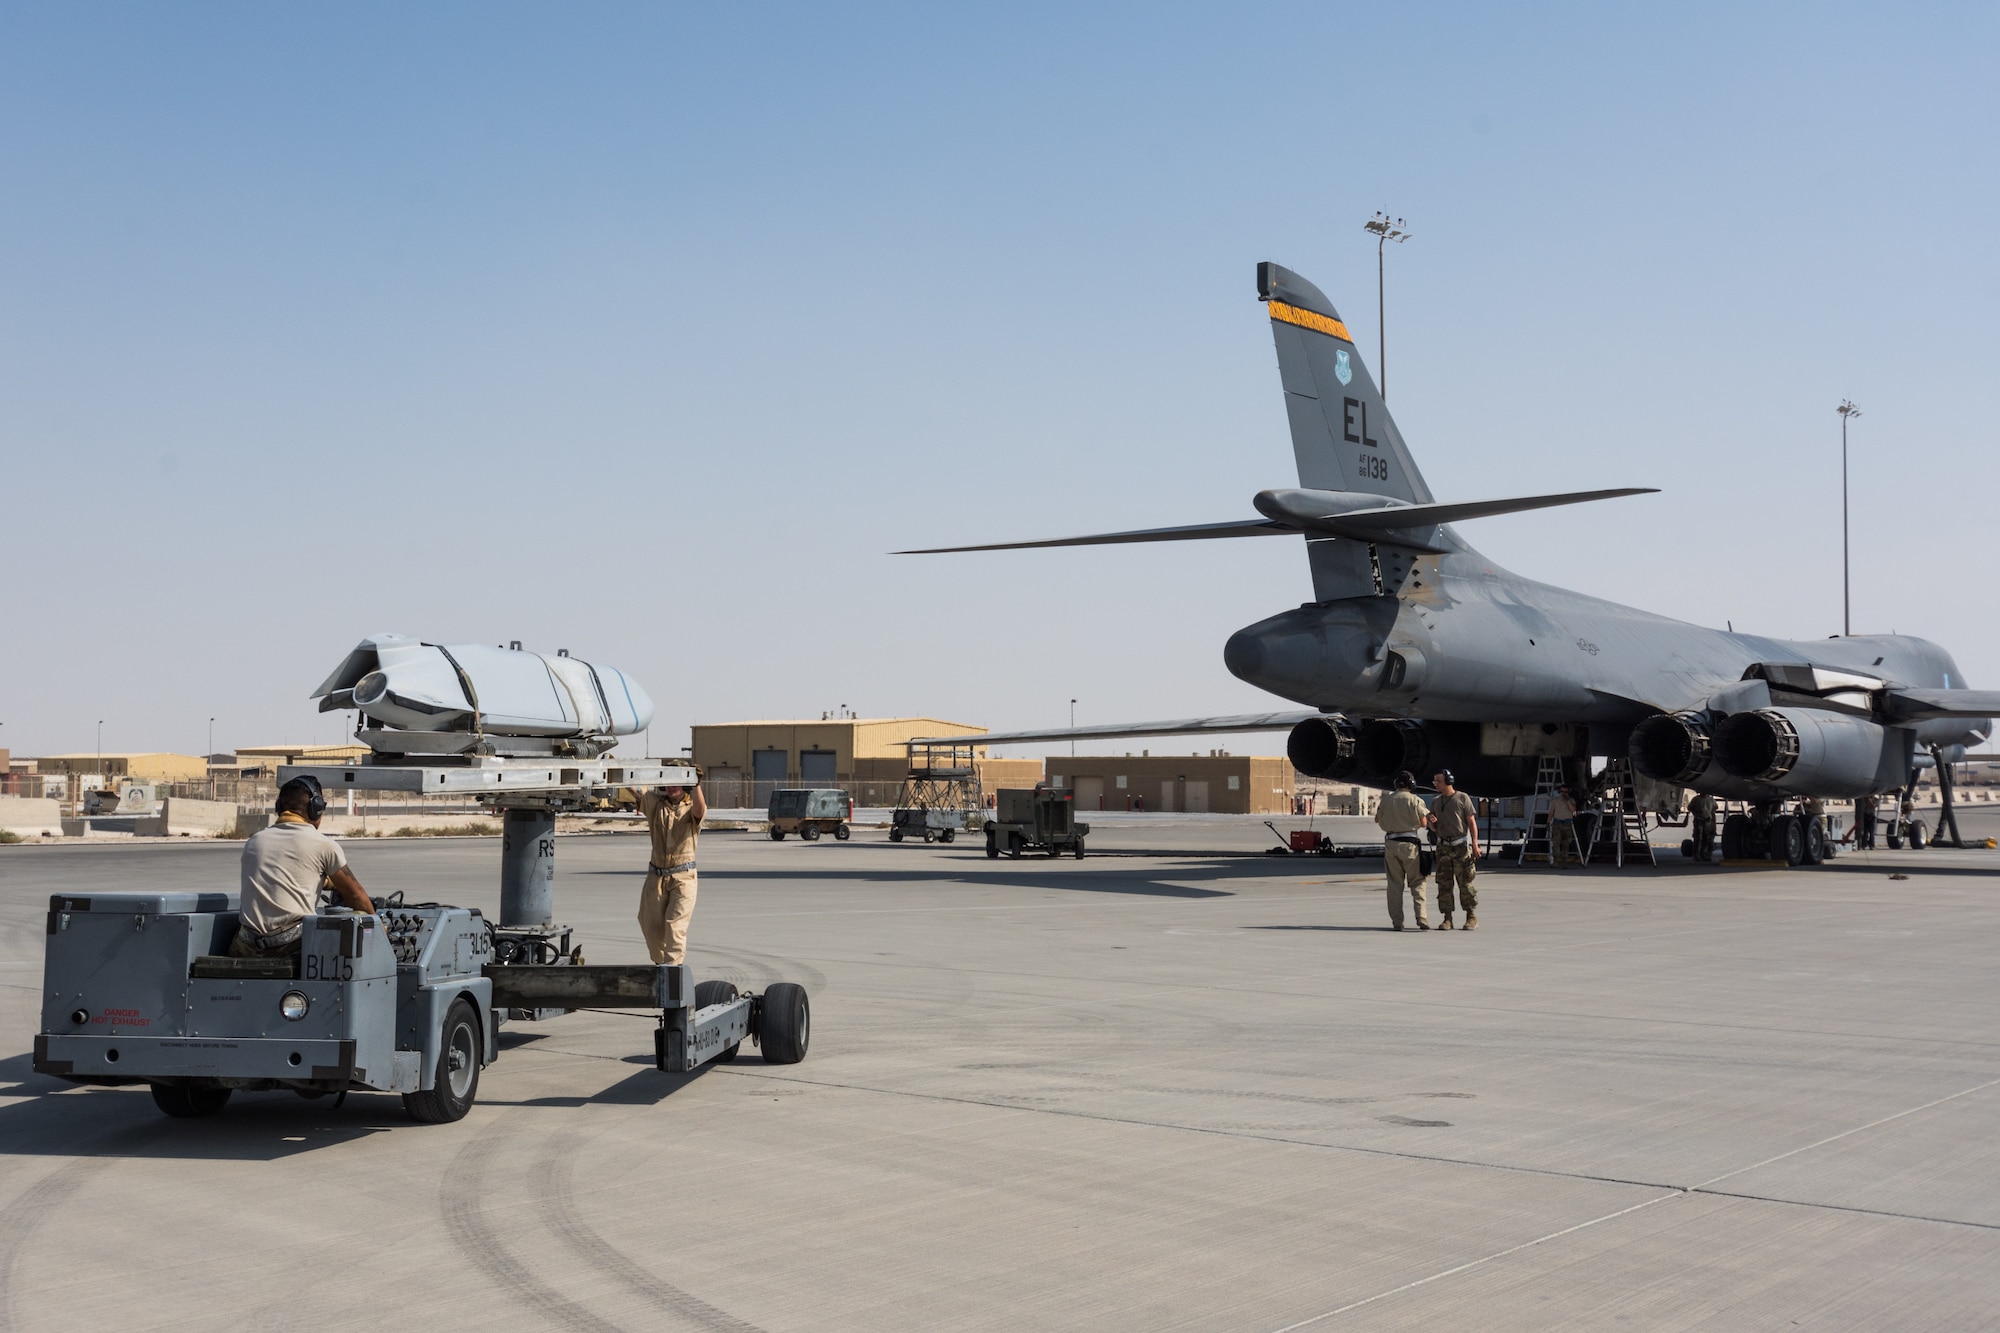 Weapons load crews assigned to the 9th Expeditionary Bomb Squadron conduct a training exercise on the B-1B Lancer with inert munitions at Al Udeid Air Base, Qatar, Sept. 13, 2018. The event involved reconfiguring the aircraft with inert munitions to maintain a high state of readiness. The B-1B Lancer carries the largest conventional payload of both guided and unguided weapons in the Air Force inventory and is the backbone of America's long-range bomber force. It can rapidly deliver massive quantities of precision and non-precision weapons against any adversary, anywhere in the world, at any time. Its armaments include up to 24 AGM-158A Joint Air-to-Surface Standoff Munitions. (U.S. Air Force photo by Tech. Sgt. Ted Nichols/Released)